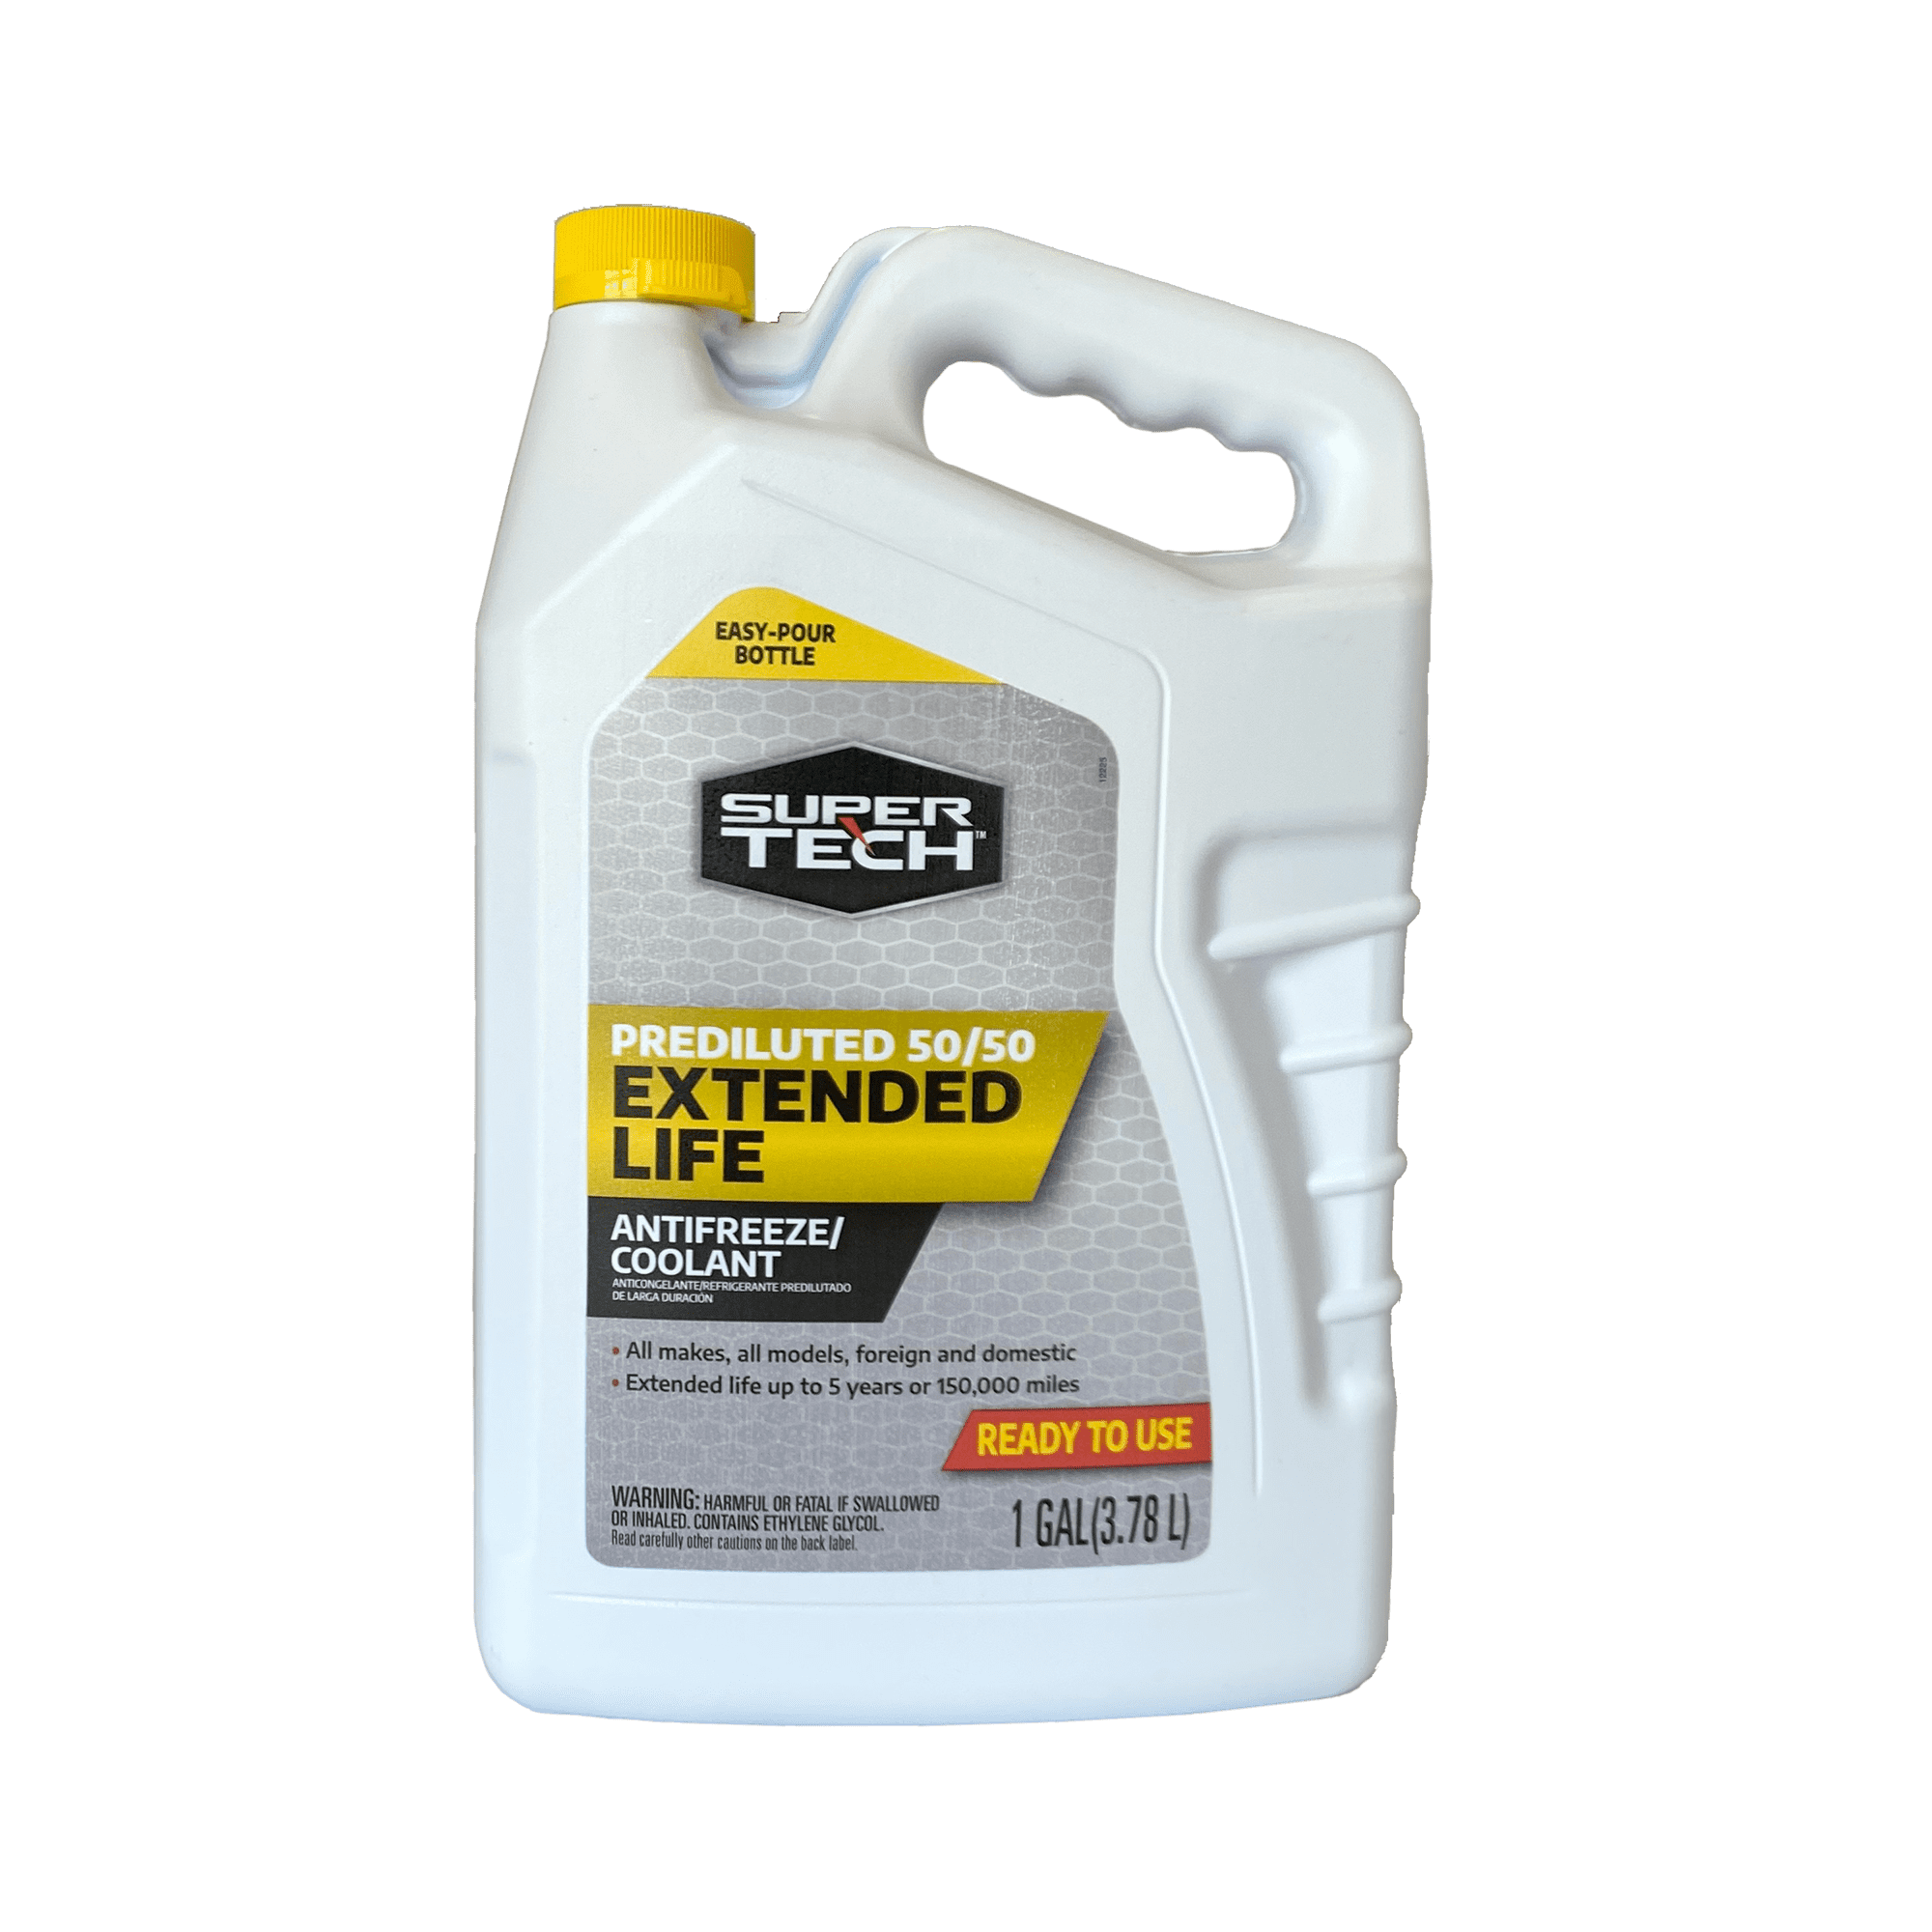 Super Tech Extended Life Prediluted 50/50 AF/Coolant